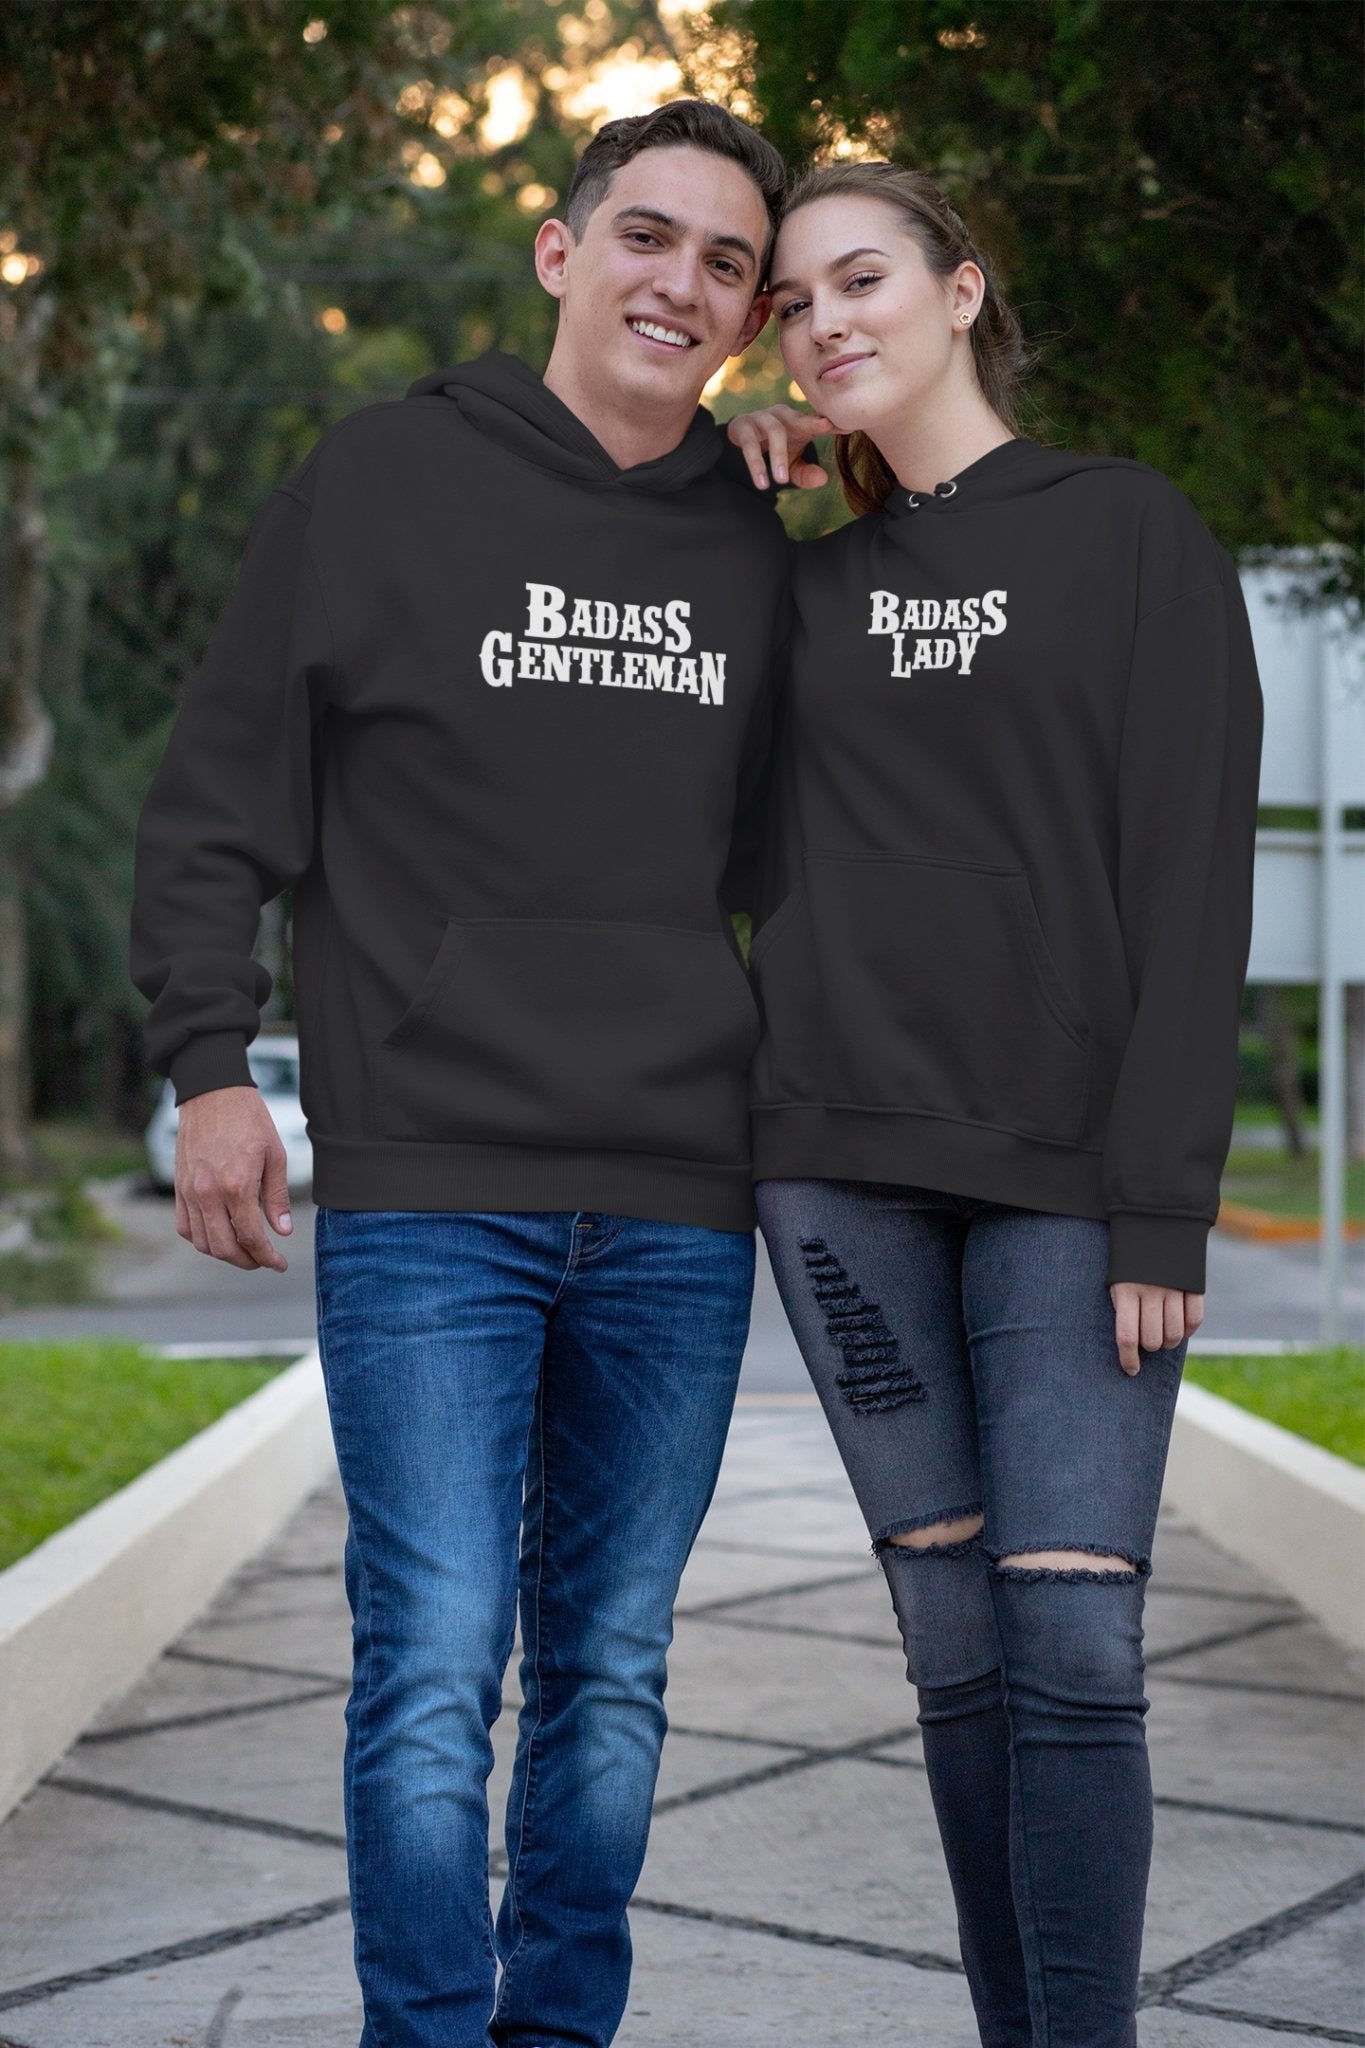 Gentleman Lady Couple Hoodie-FunkyTradition - FunkyTradition